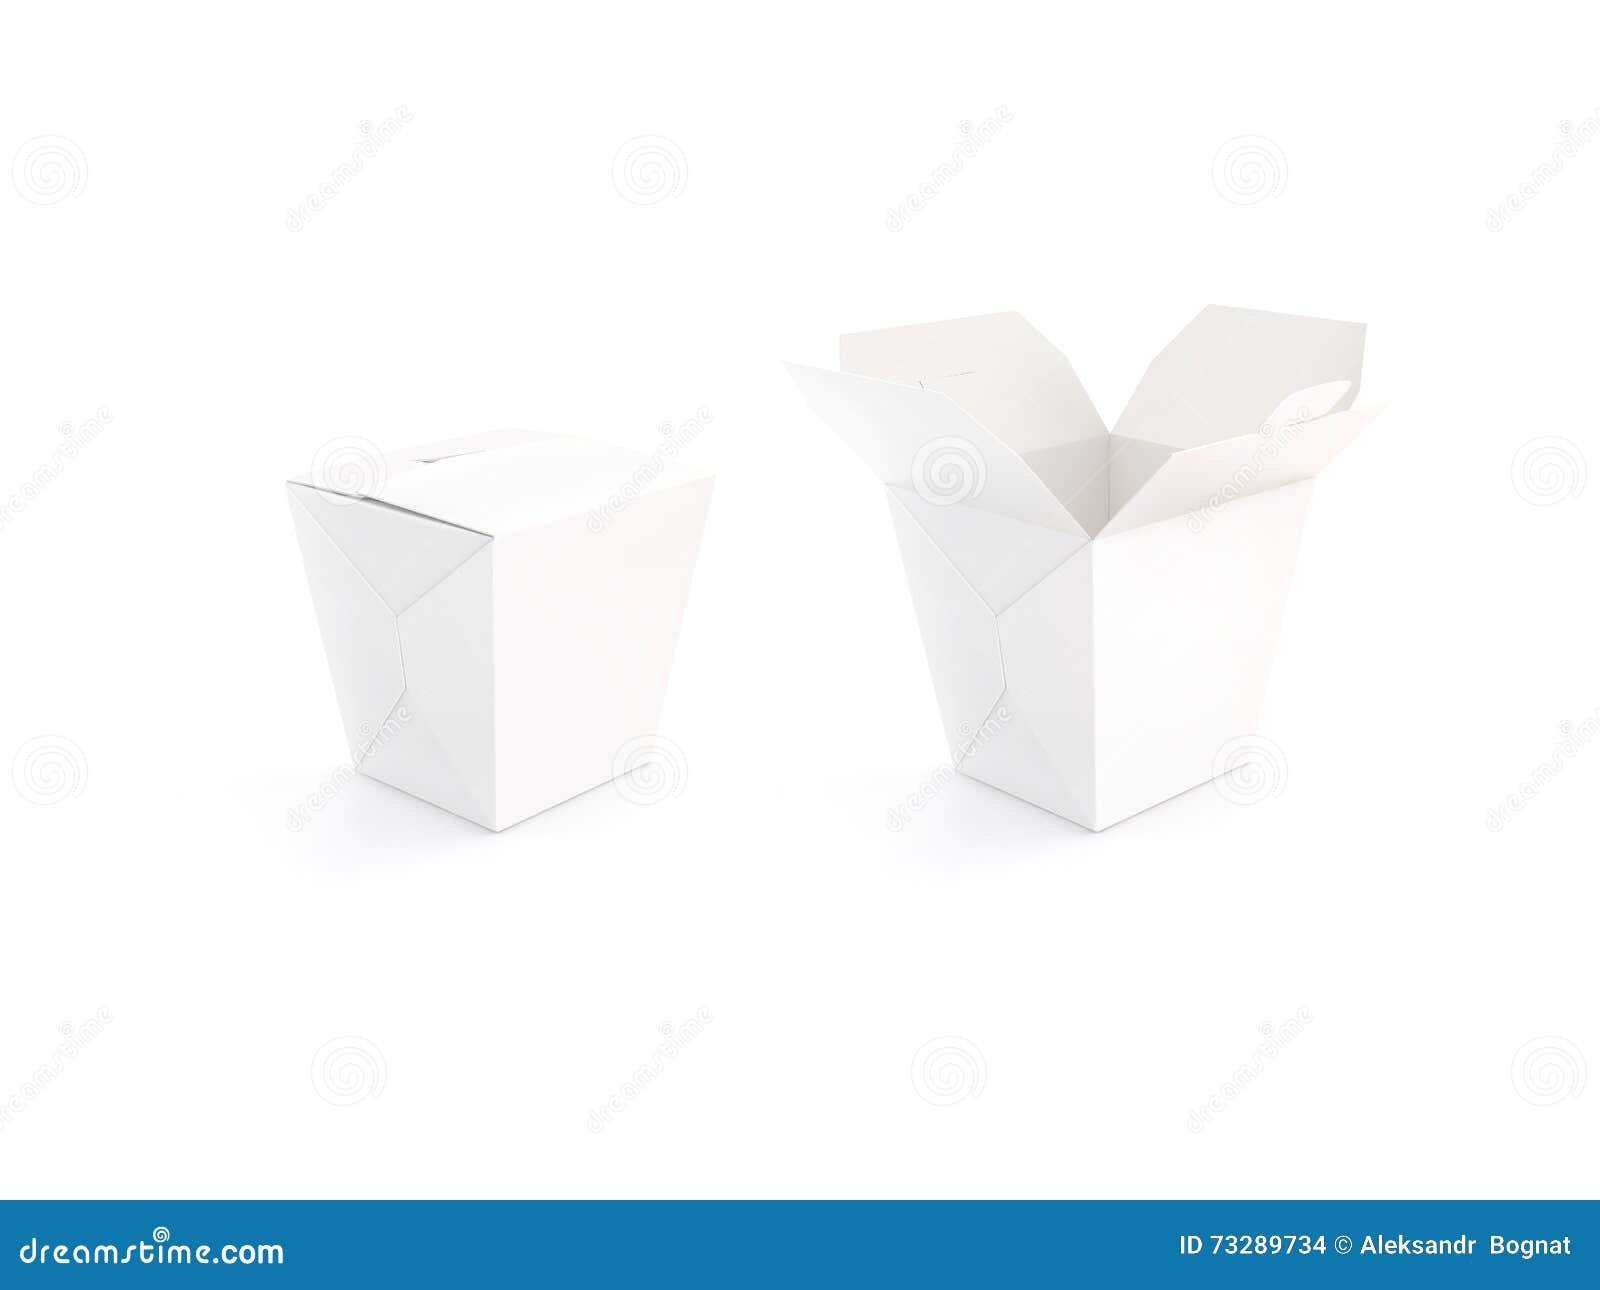 Download Close And Open Blank Wok Box Mockup Stand 3d Rendering Stock Photo Image Of Pasta Rendering 73289734